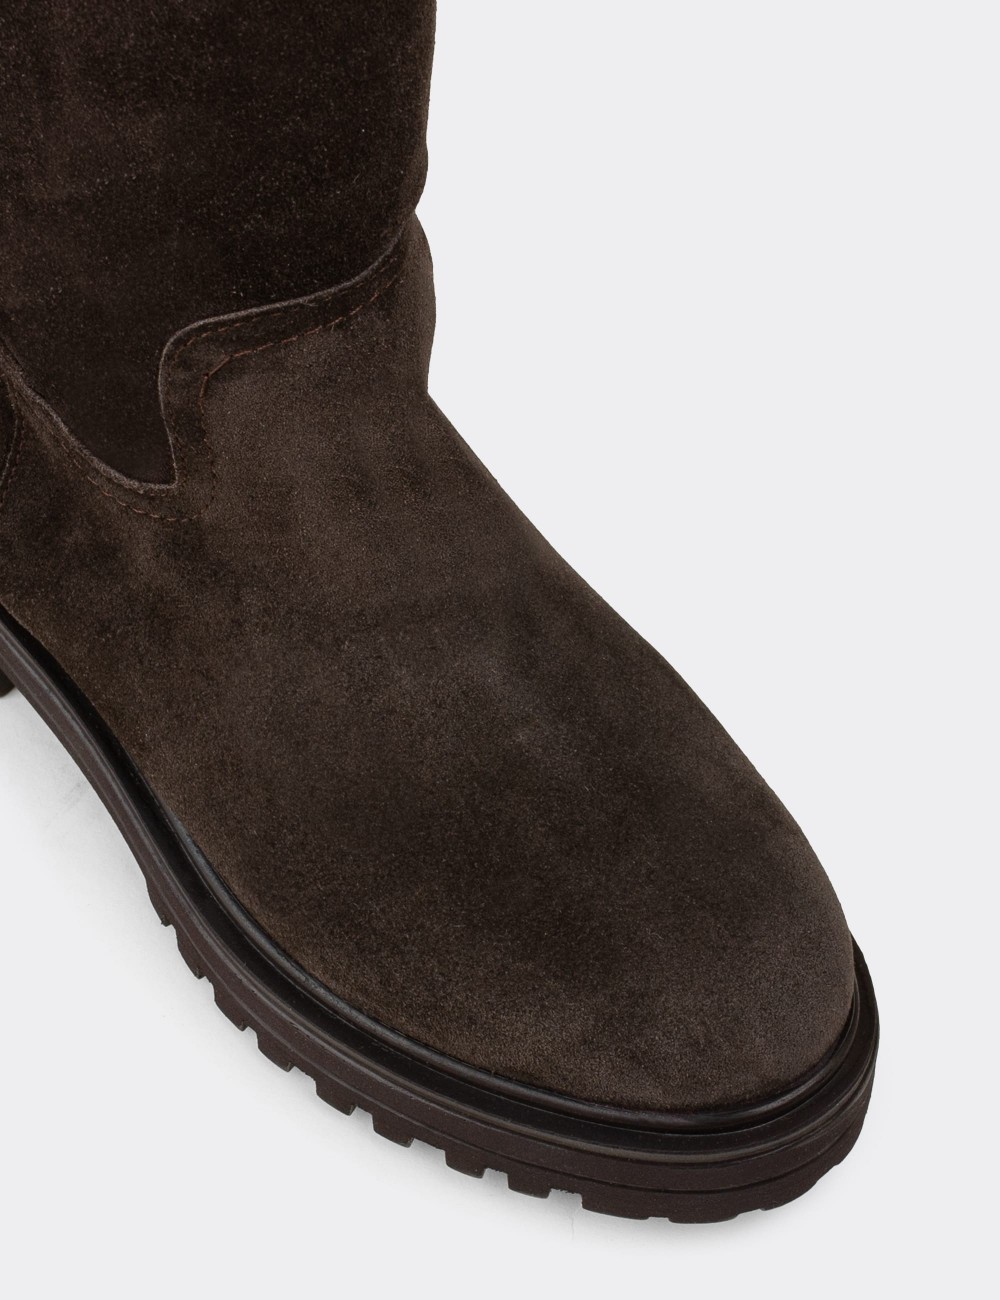 Brown Suede Leather Boots - 02150ZKHVE02